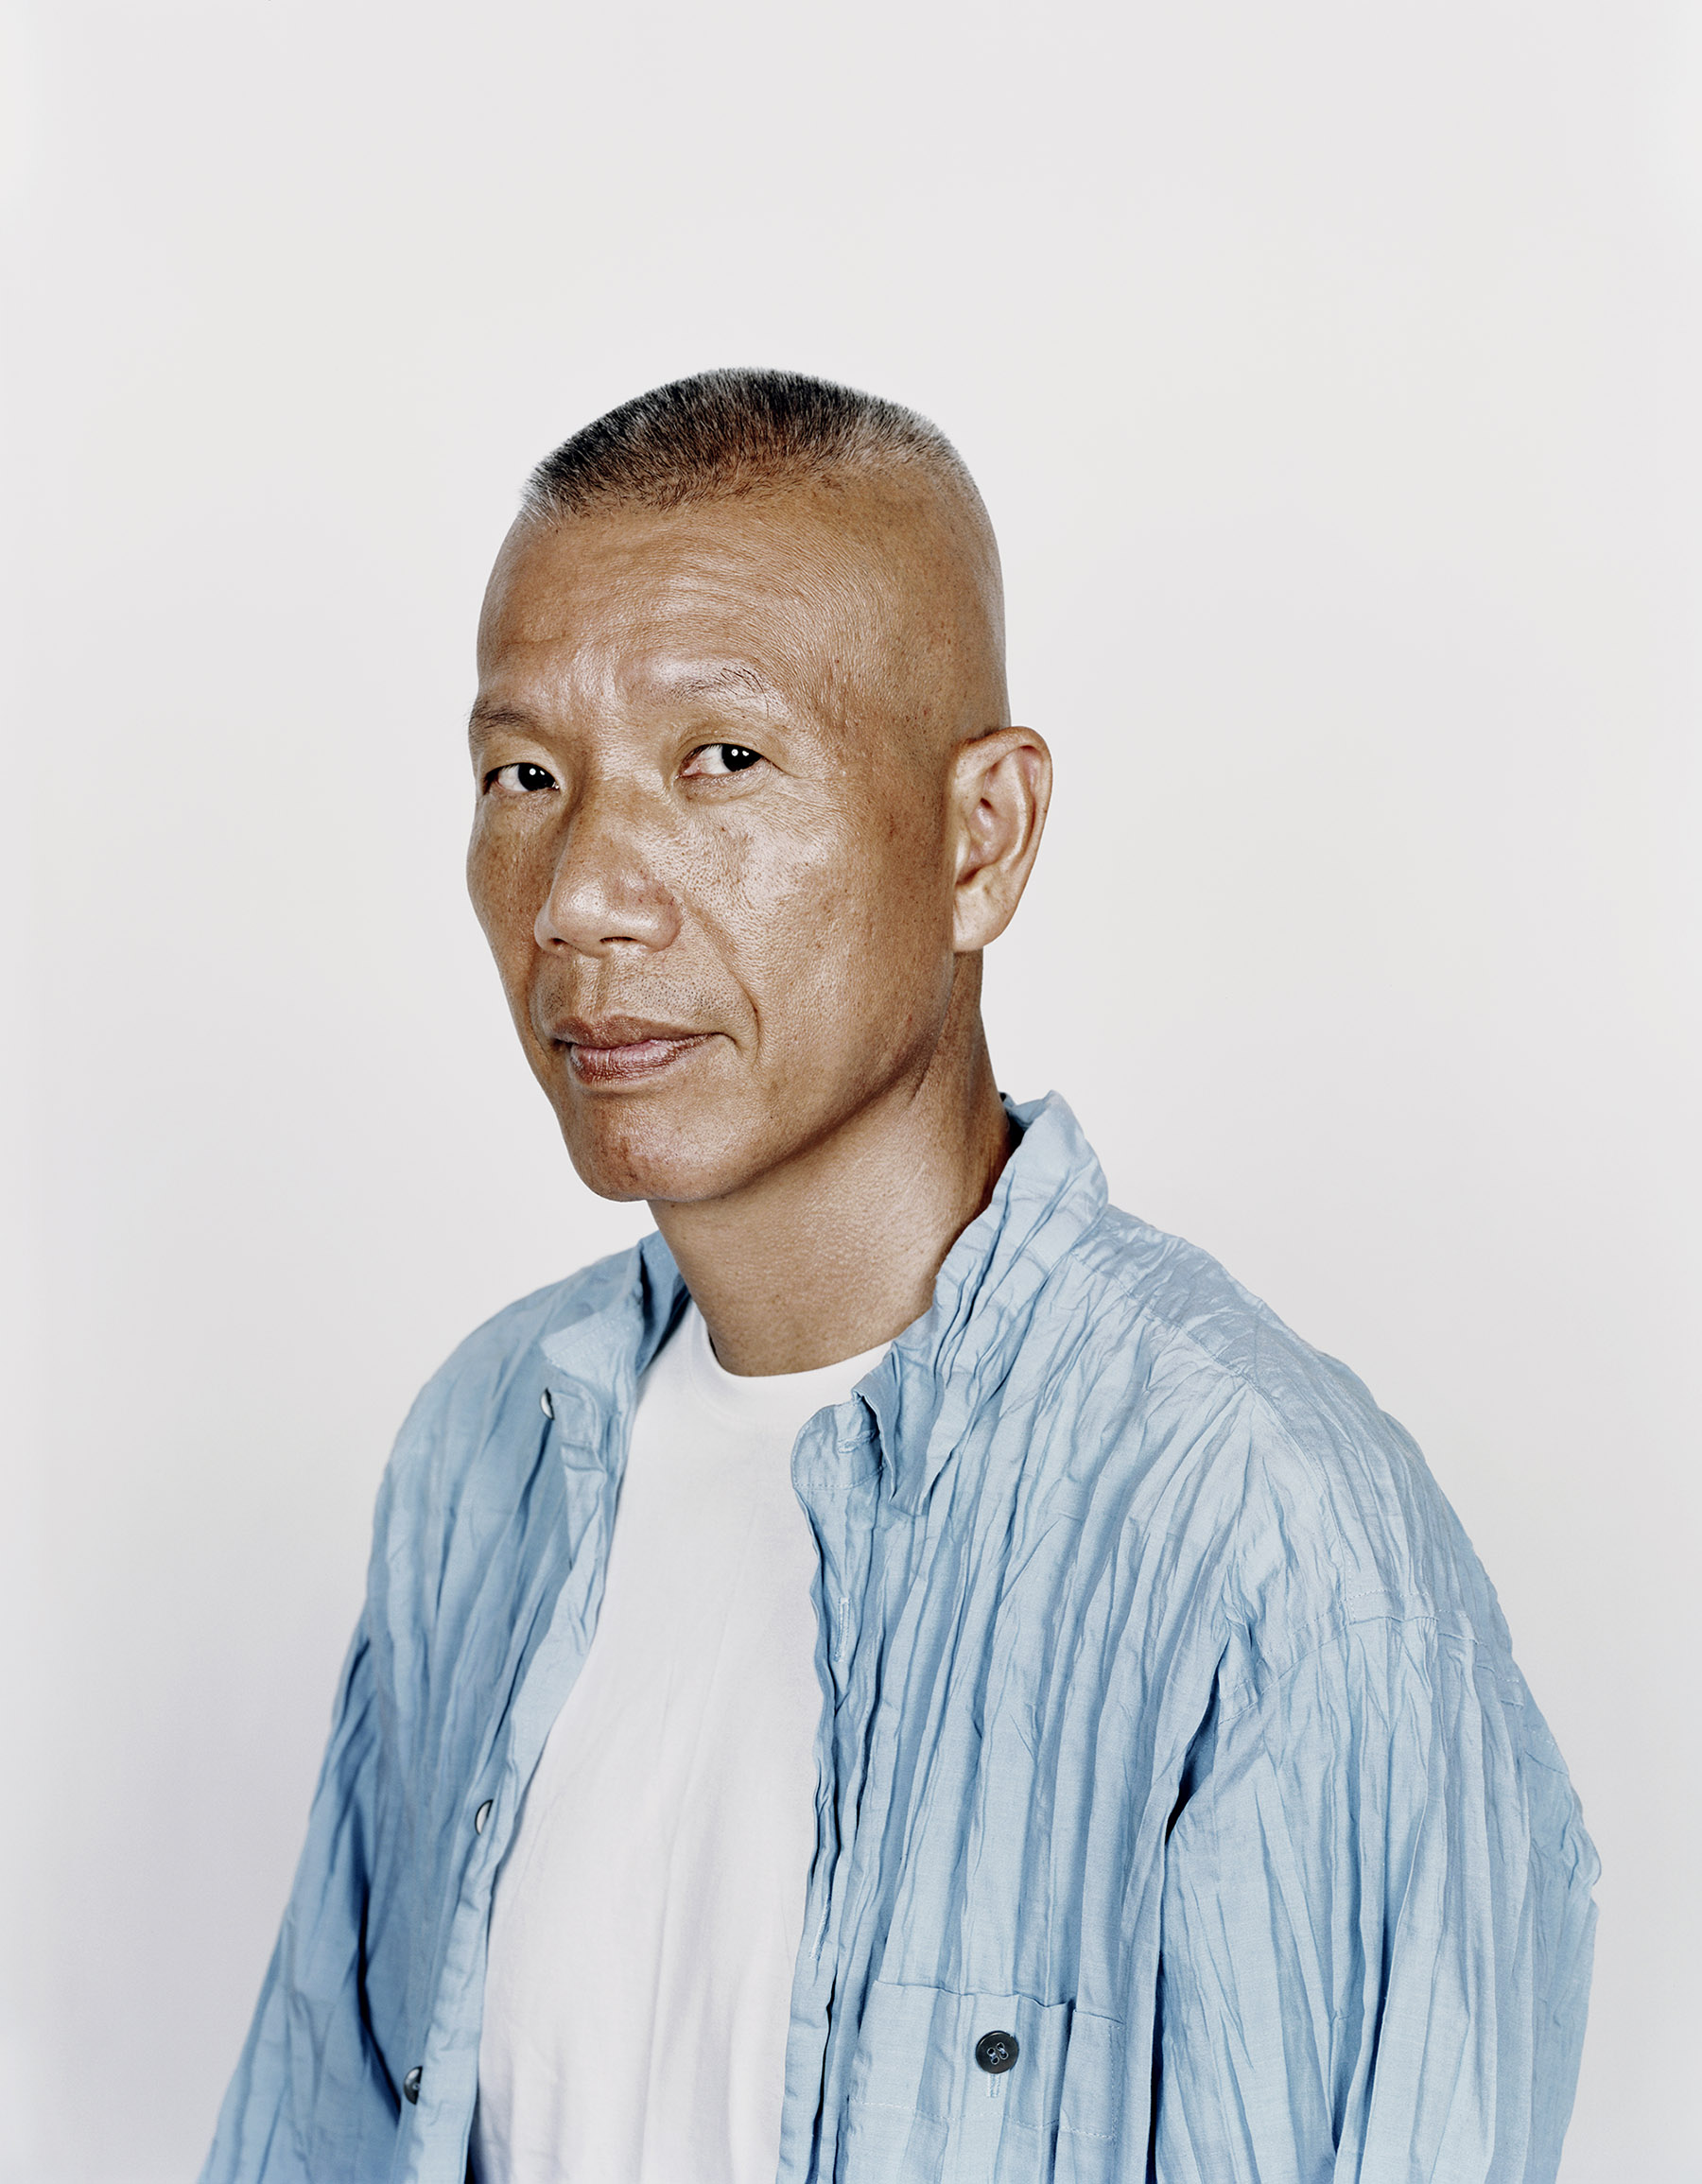 Artist Cai Guo-Qiang’s transcendent new NFT project invites you to connect to an “Oracle That Lives on the Blockchain”